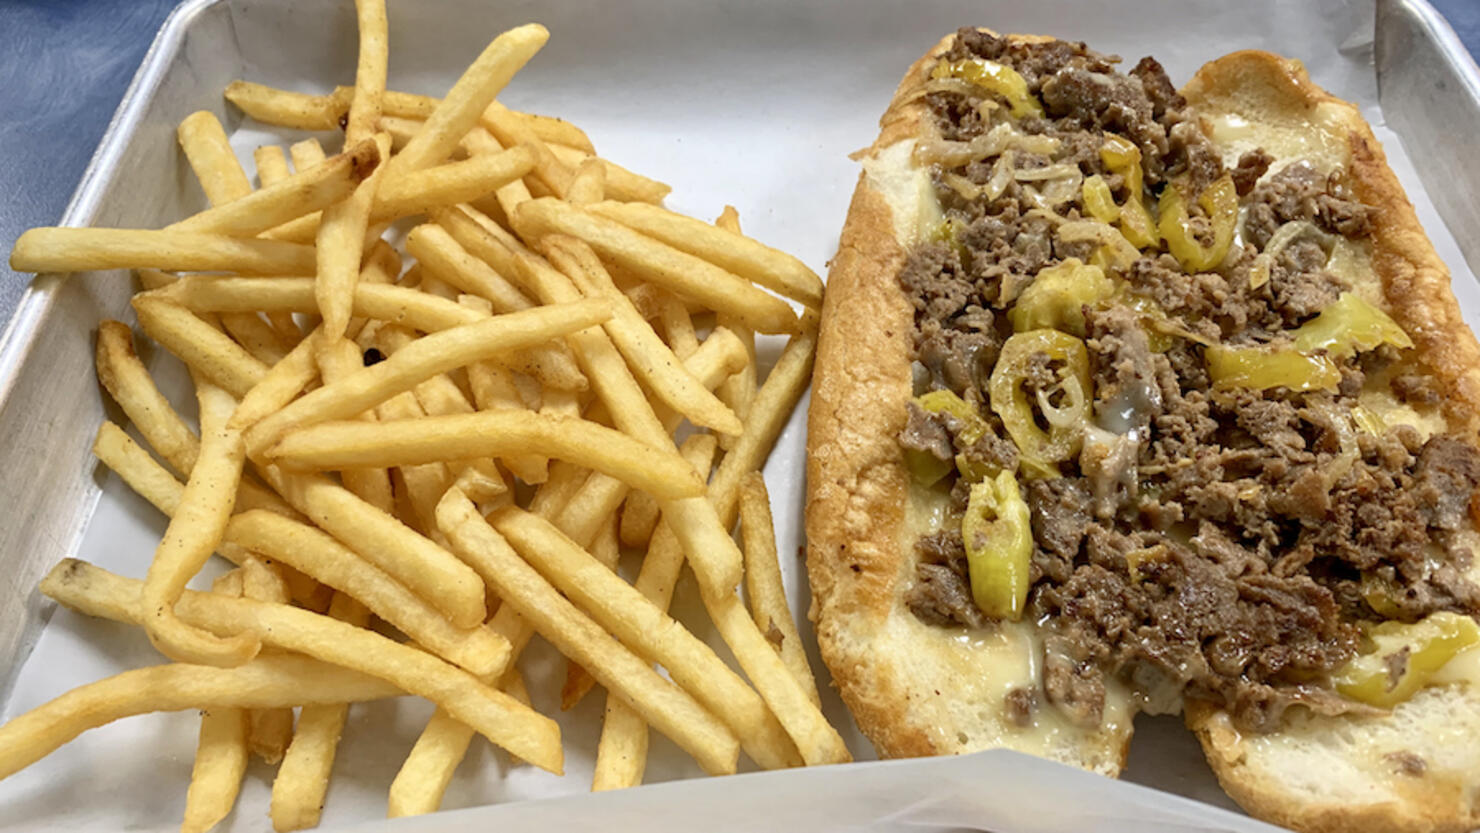 Philly cheesesteak and fresh fried potatoes